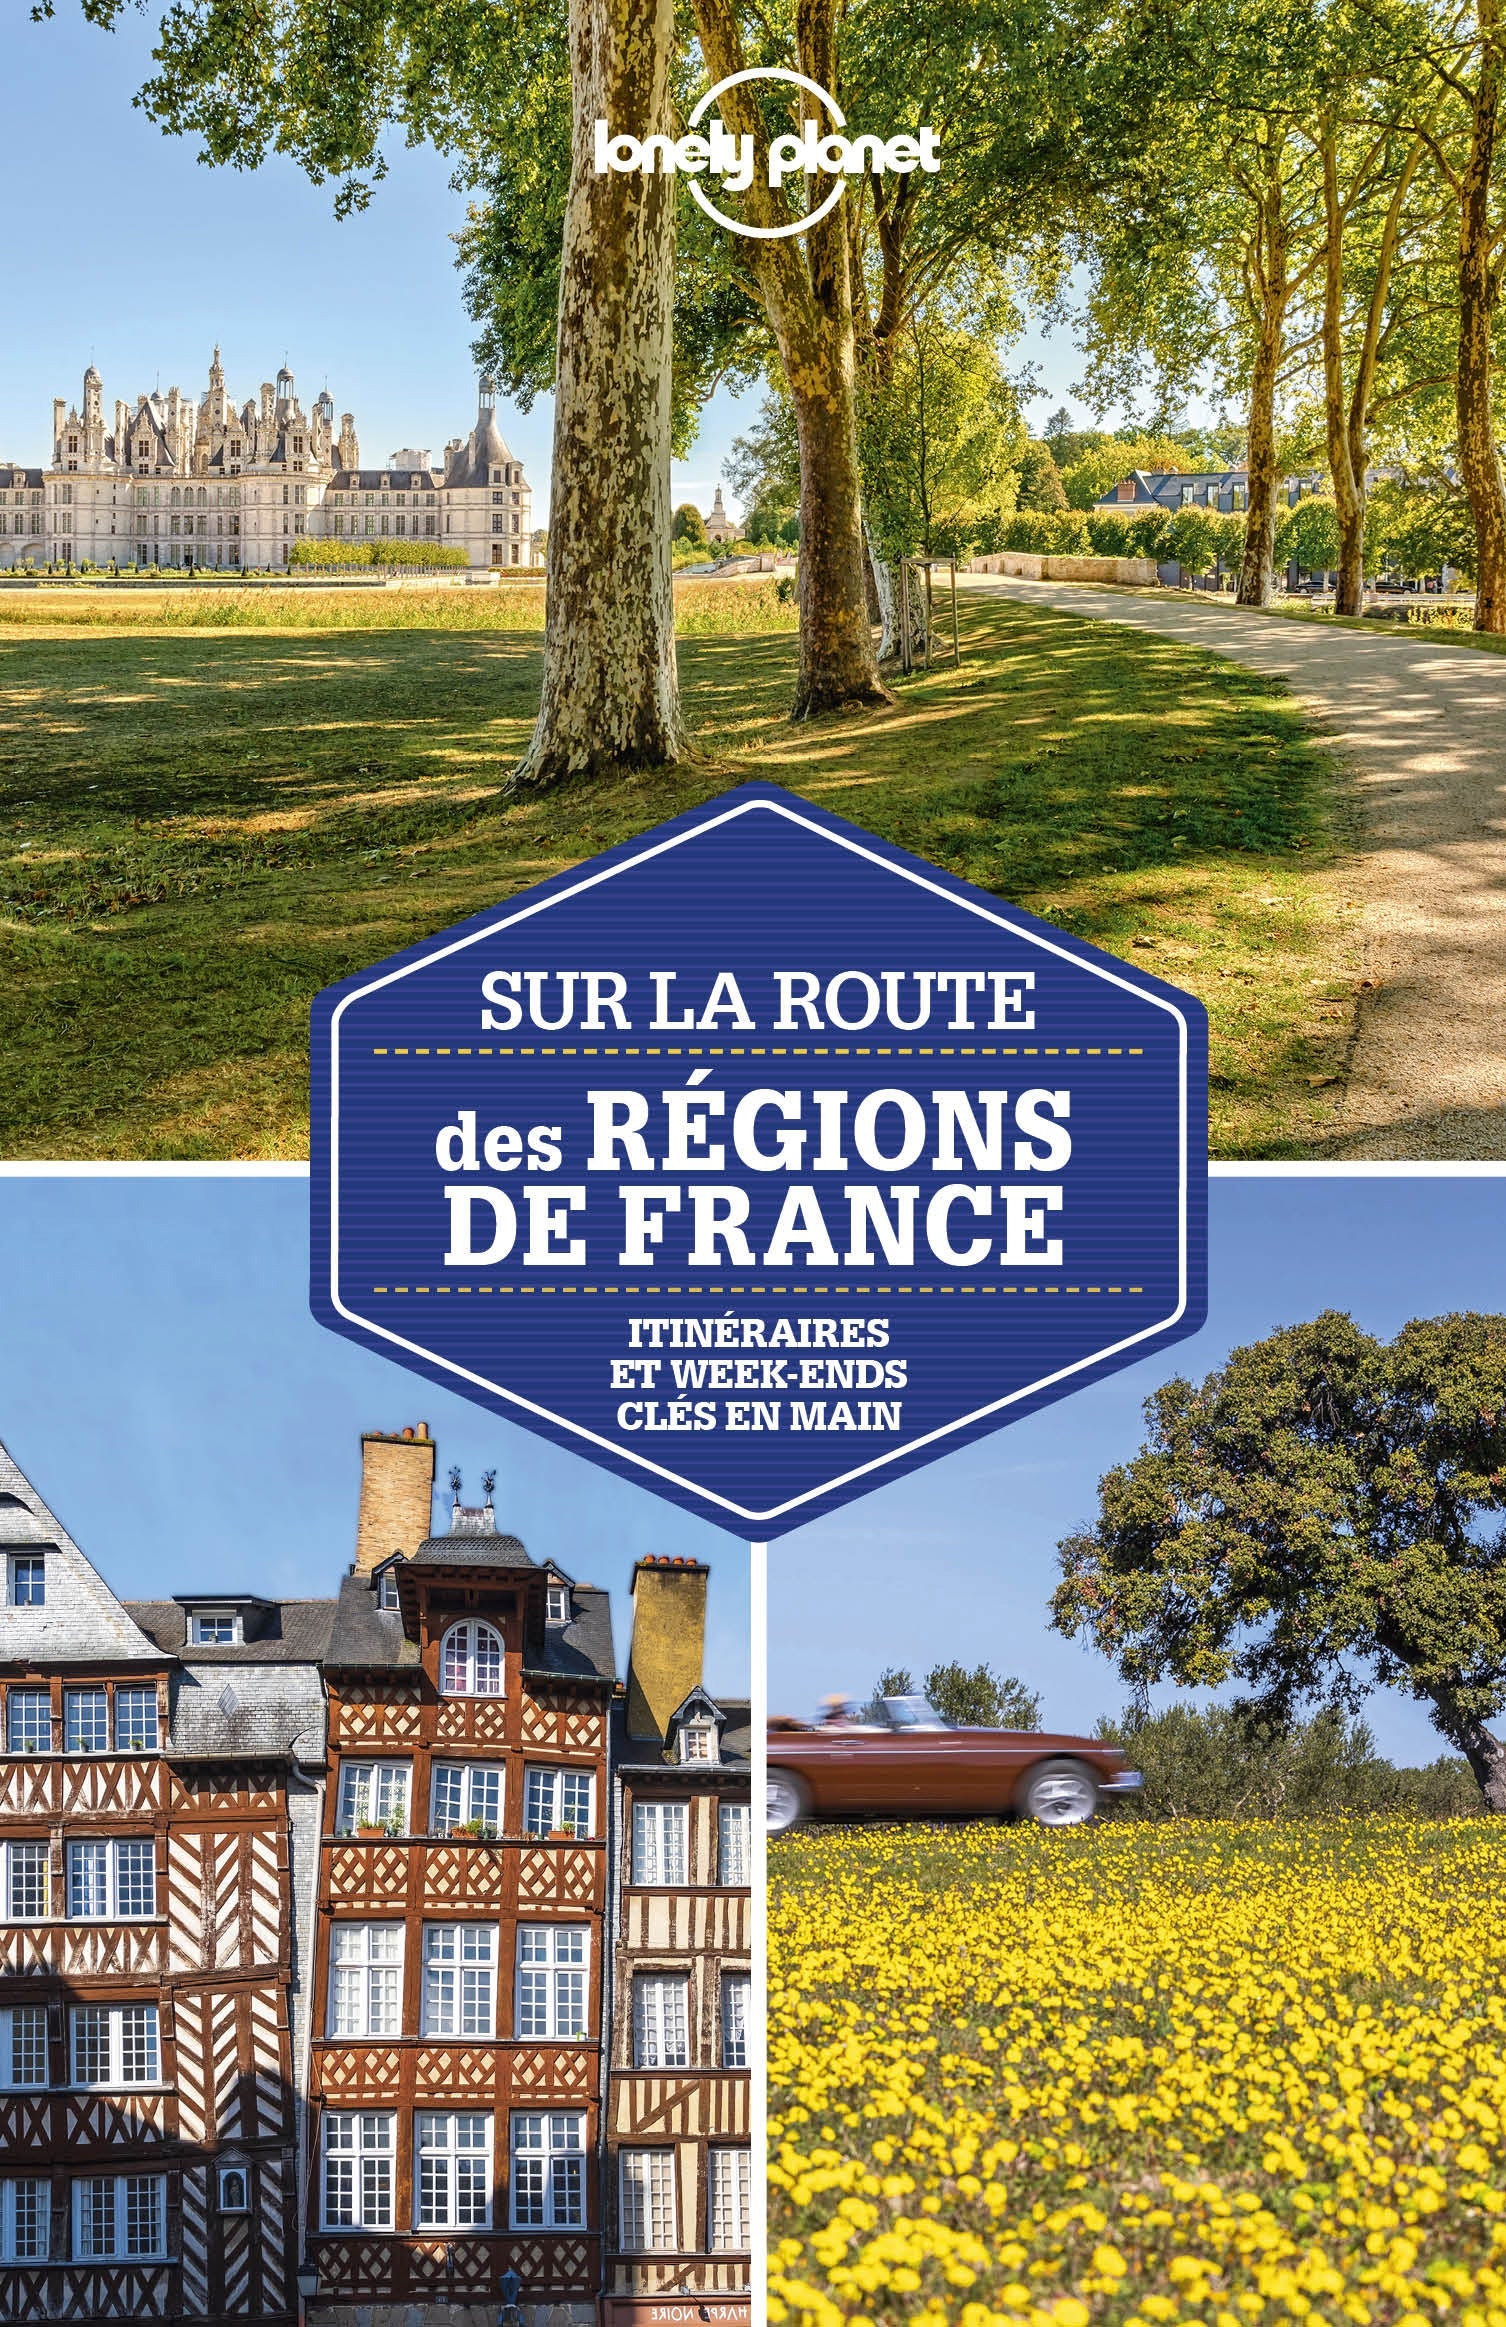 On　regions　the　Travel　the　road　routes　Guide　and　MapsCompany　Travel　the　France:　to　best　of　–　hiking　maps